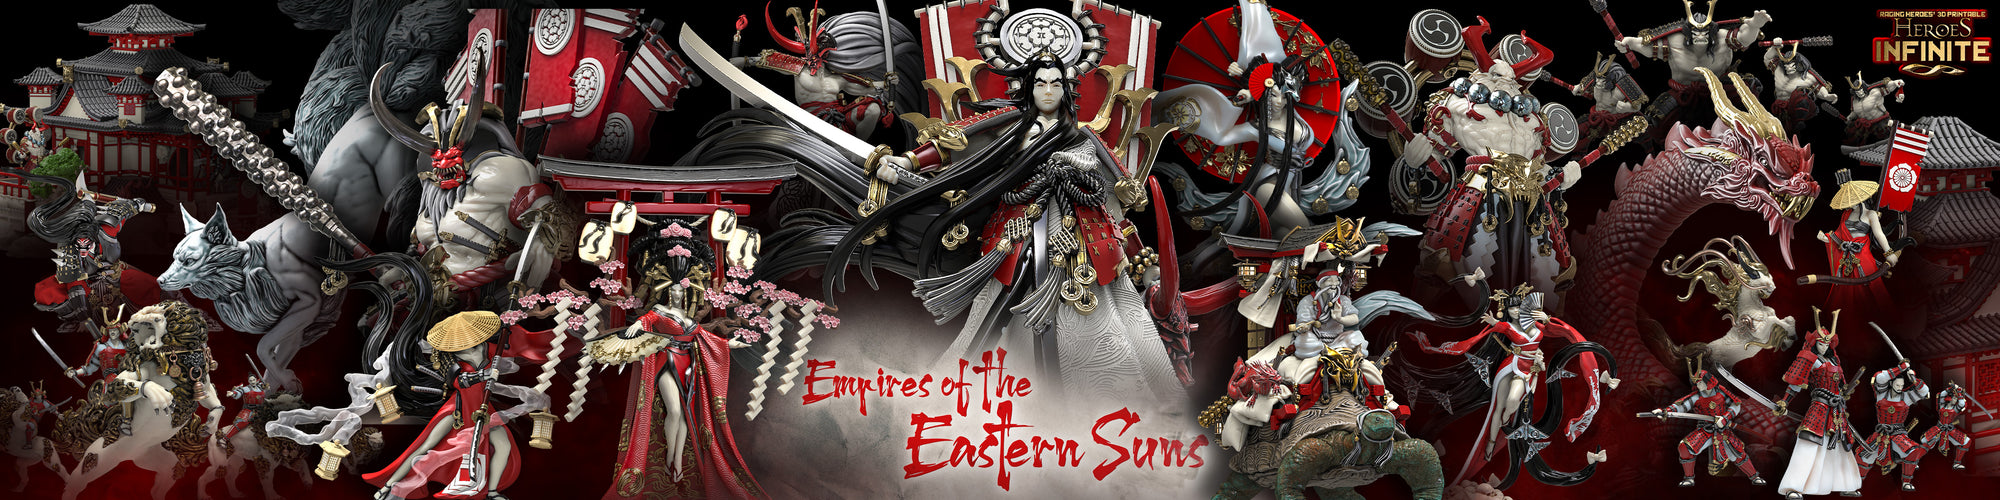 January 2022 Release: Empire of the Eastern Suns